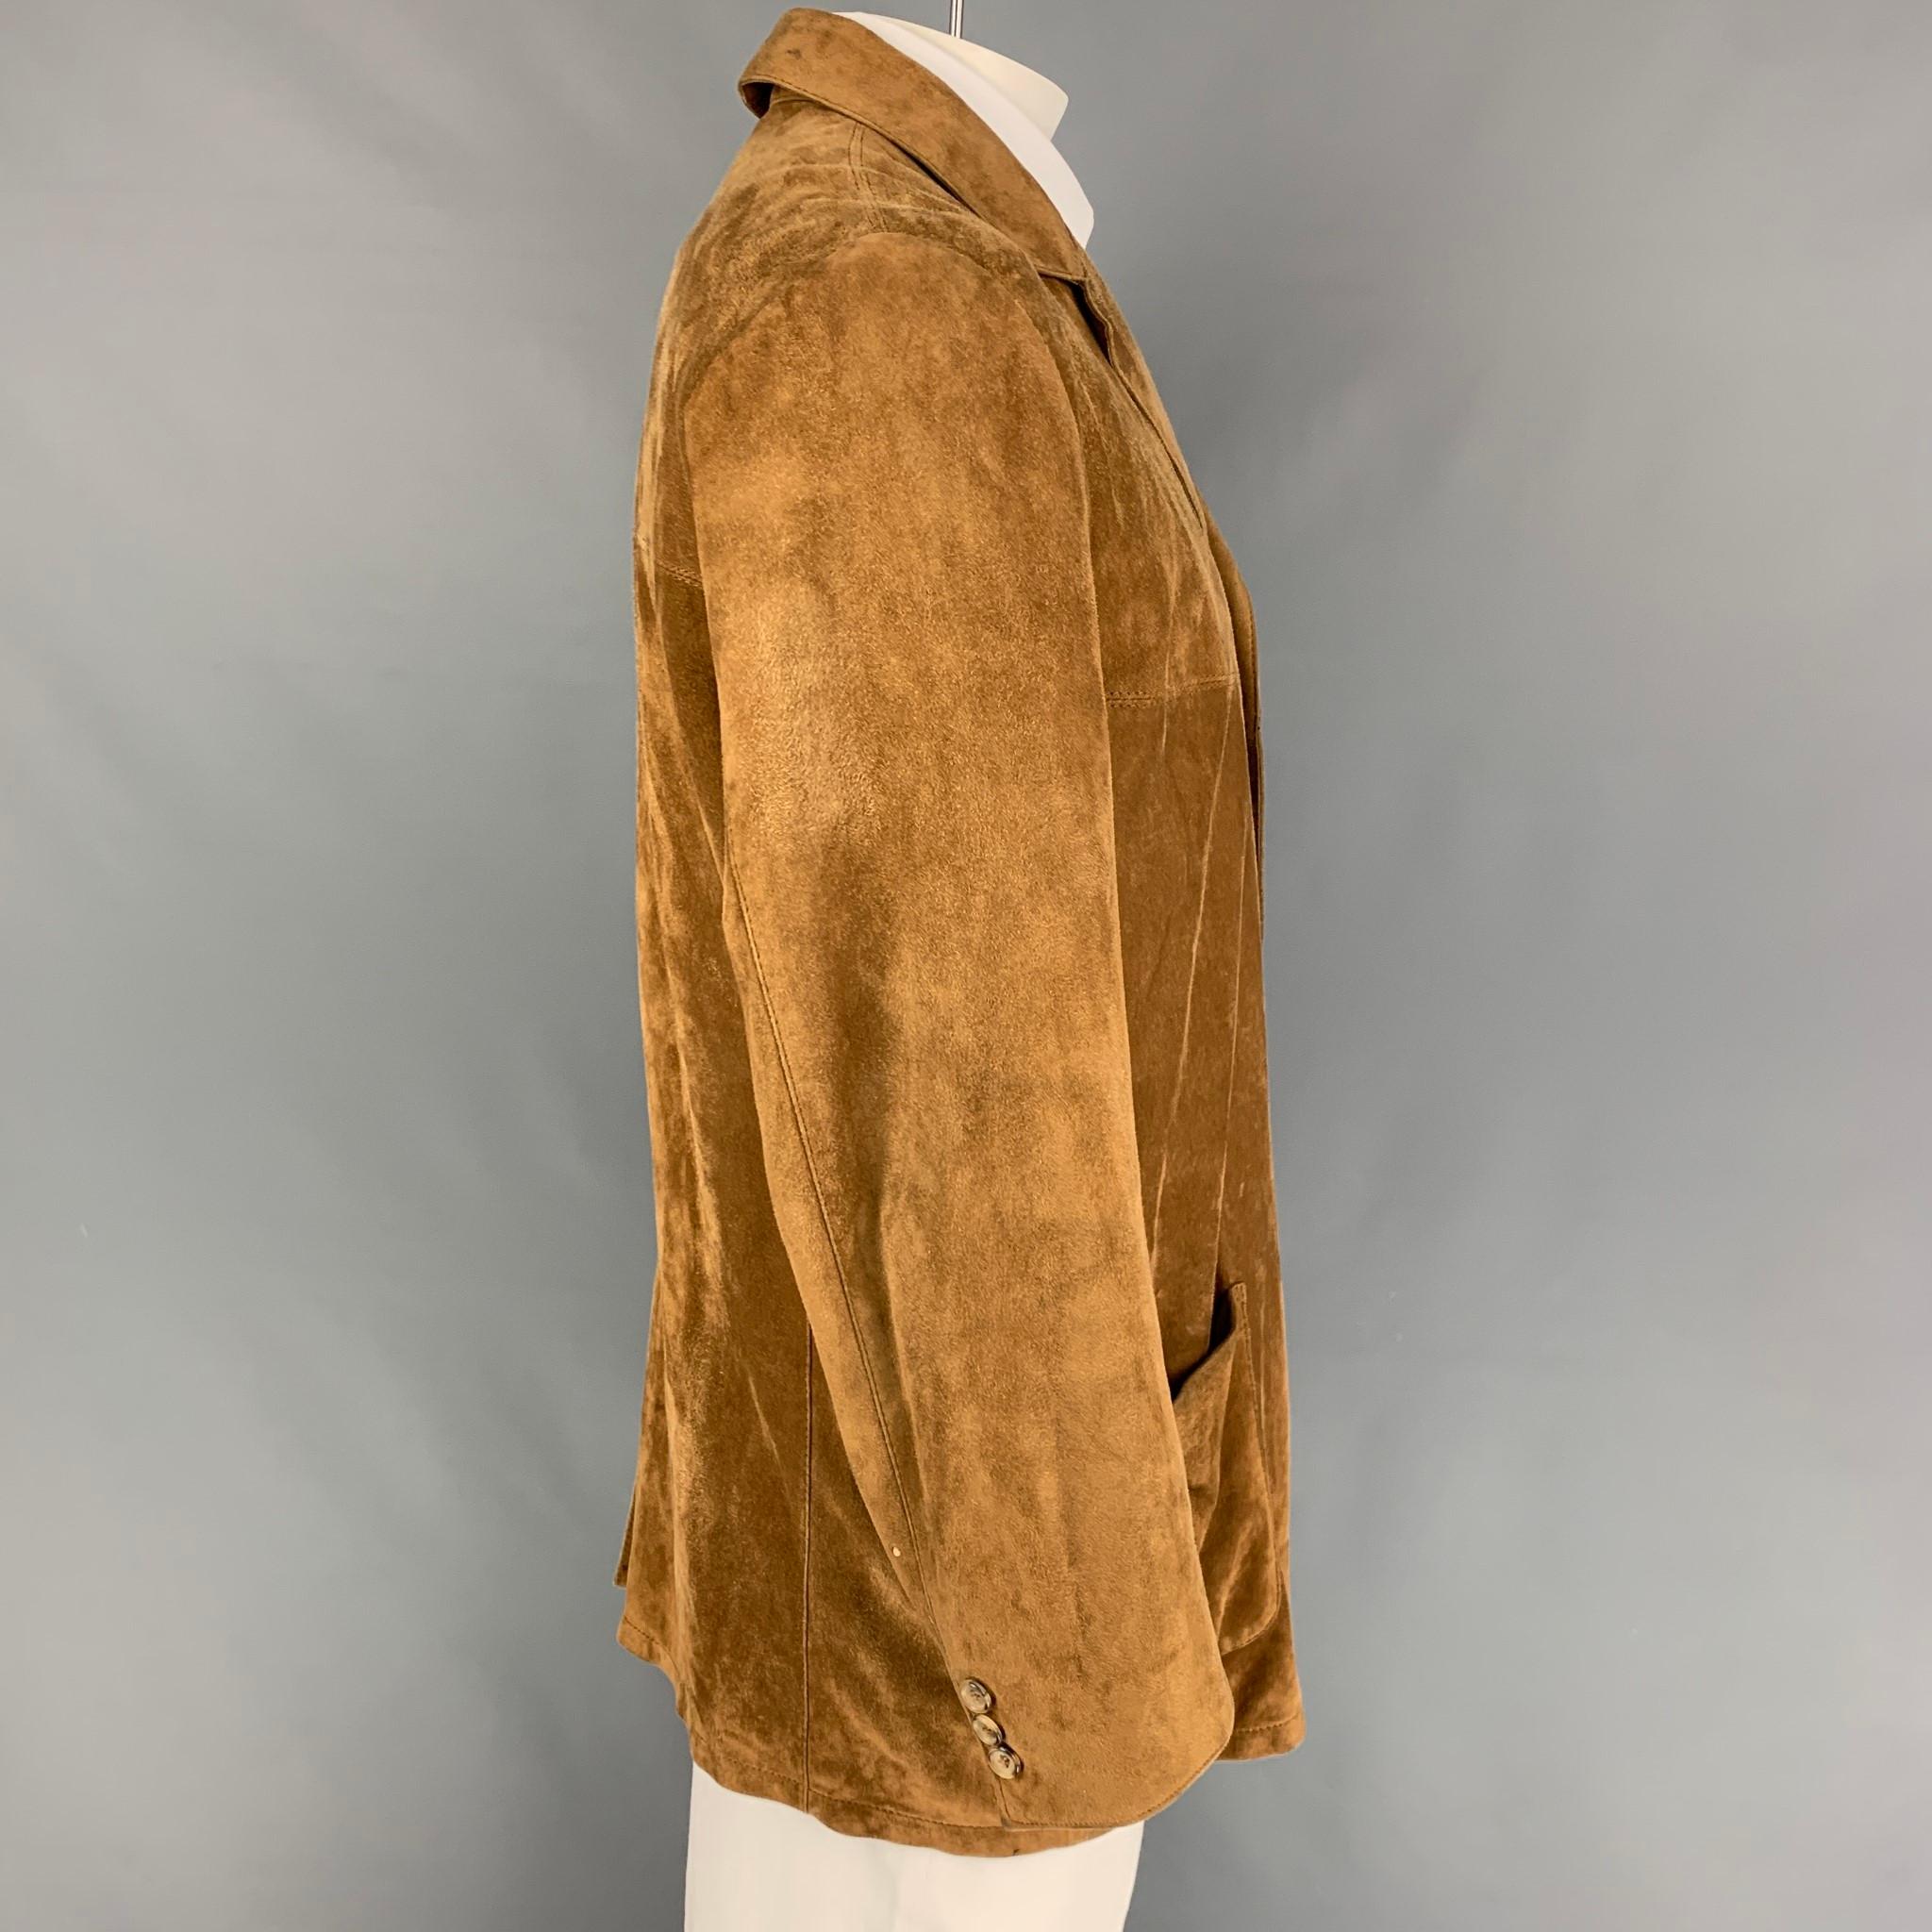 SALFRA for BERGDORF GOODMAN sport coat comes in a tan suede with a full liner featuring a notch lapel, patch pockets, single back vent, and a buttoned closure. Made in Italy. 

Very Good Pre-Owned Condition.
Marked: 56

Measurements:

Shoulder: 19.5